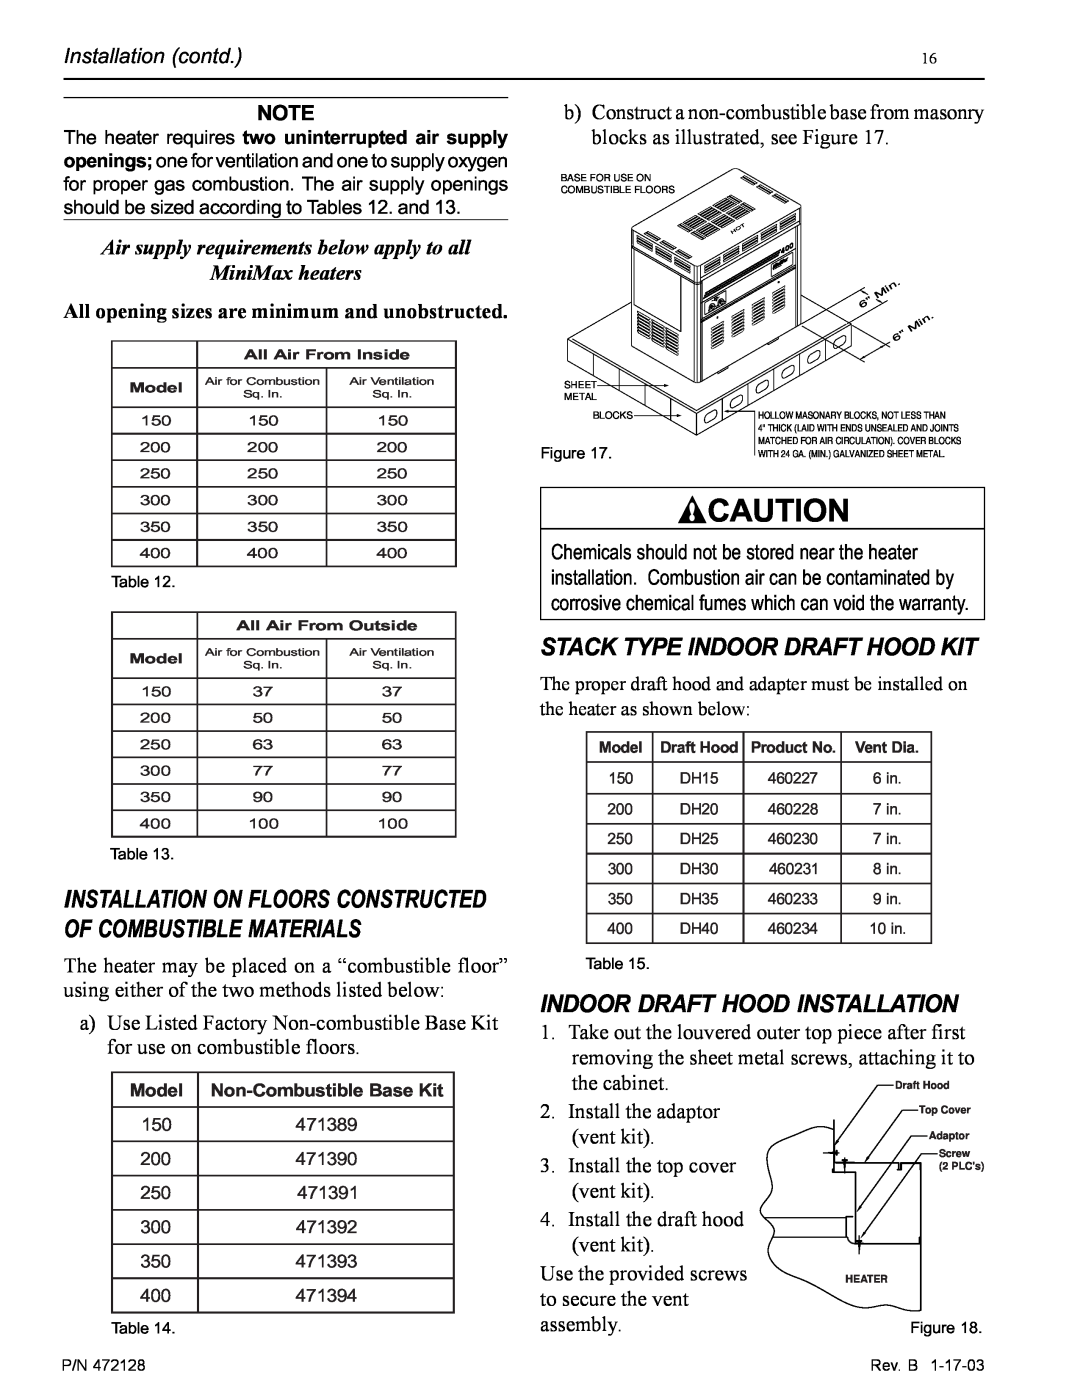 Pentair CH Stack Type Indoor Draft Hood Kit, Indoor Draft Hood Installation, Air supply requirements below apply to all 